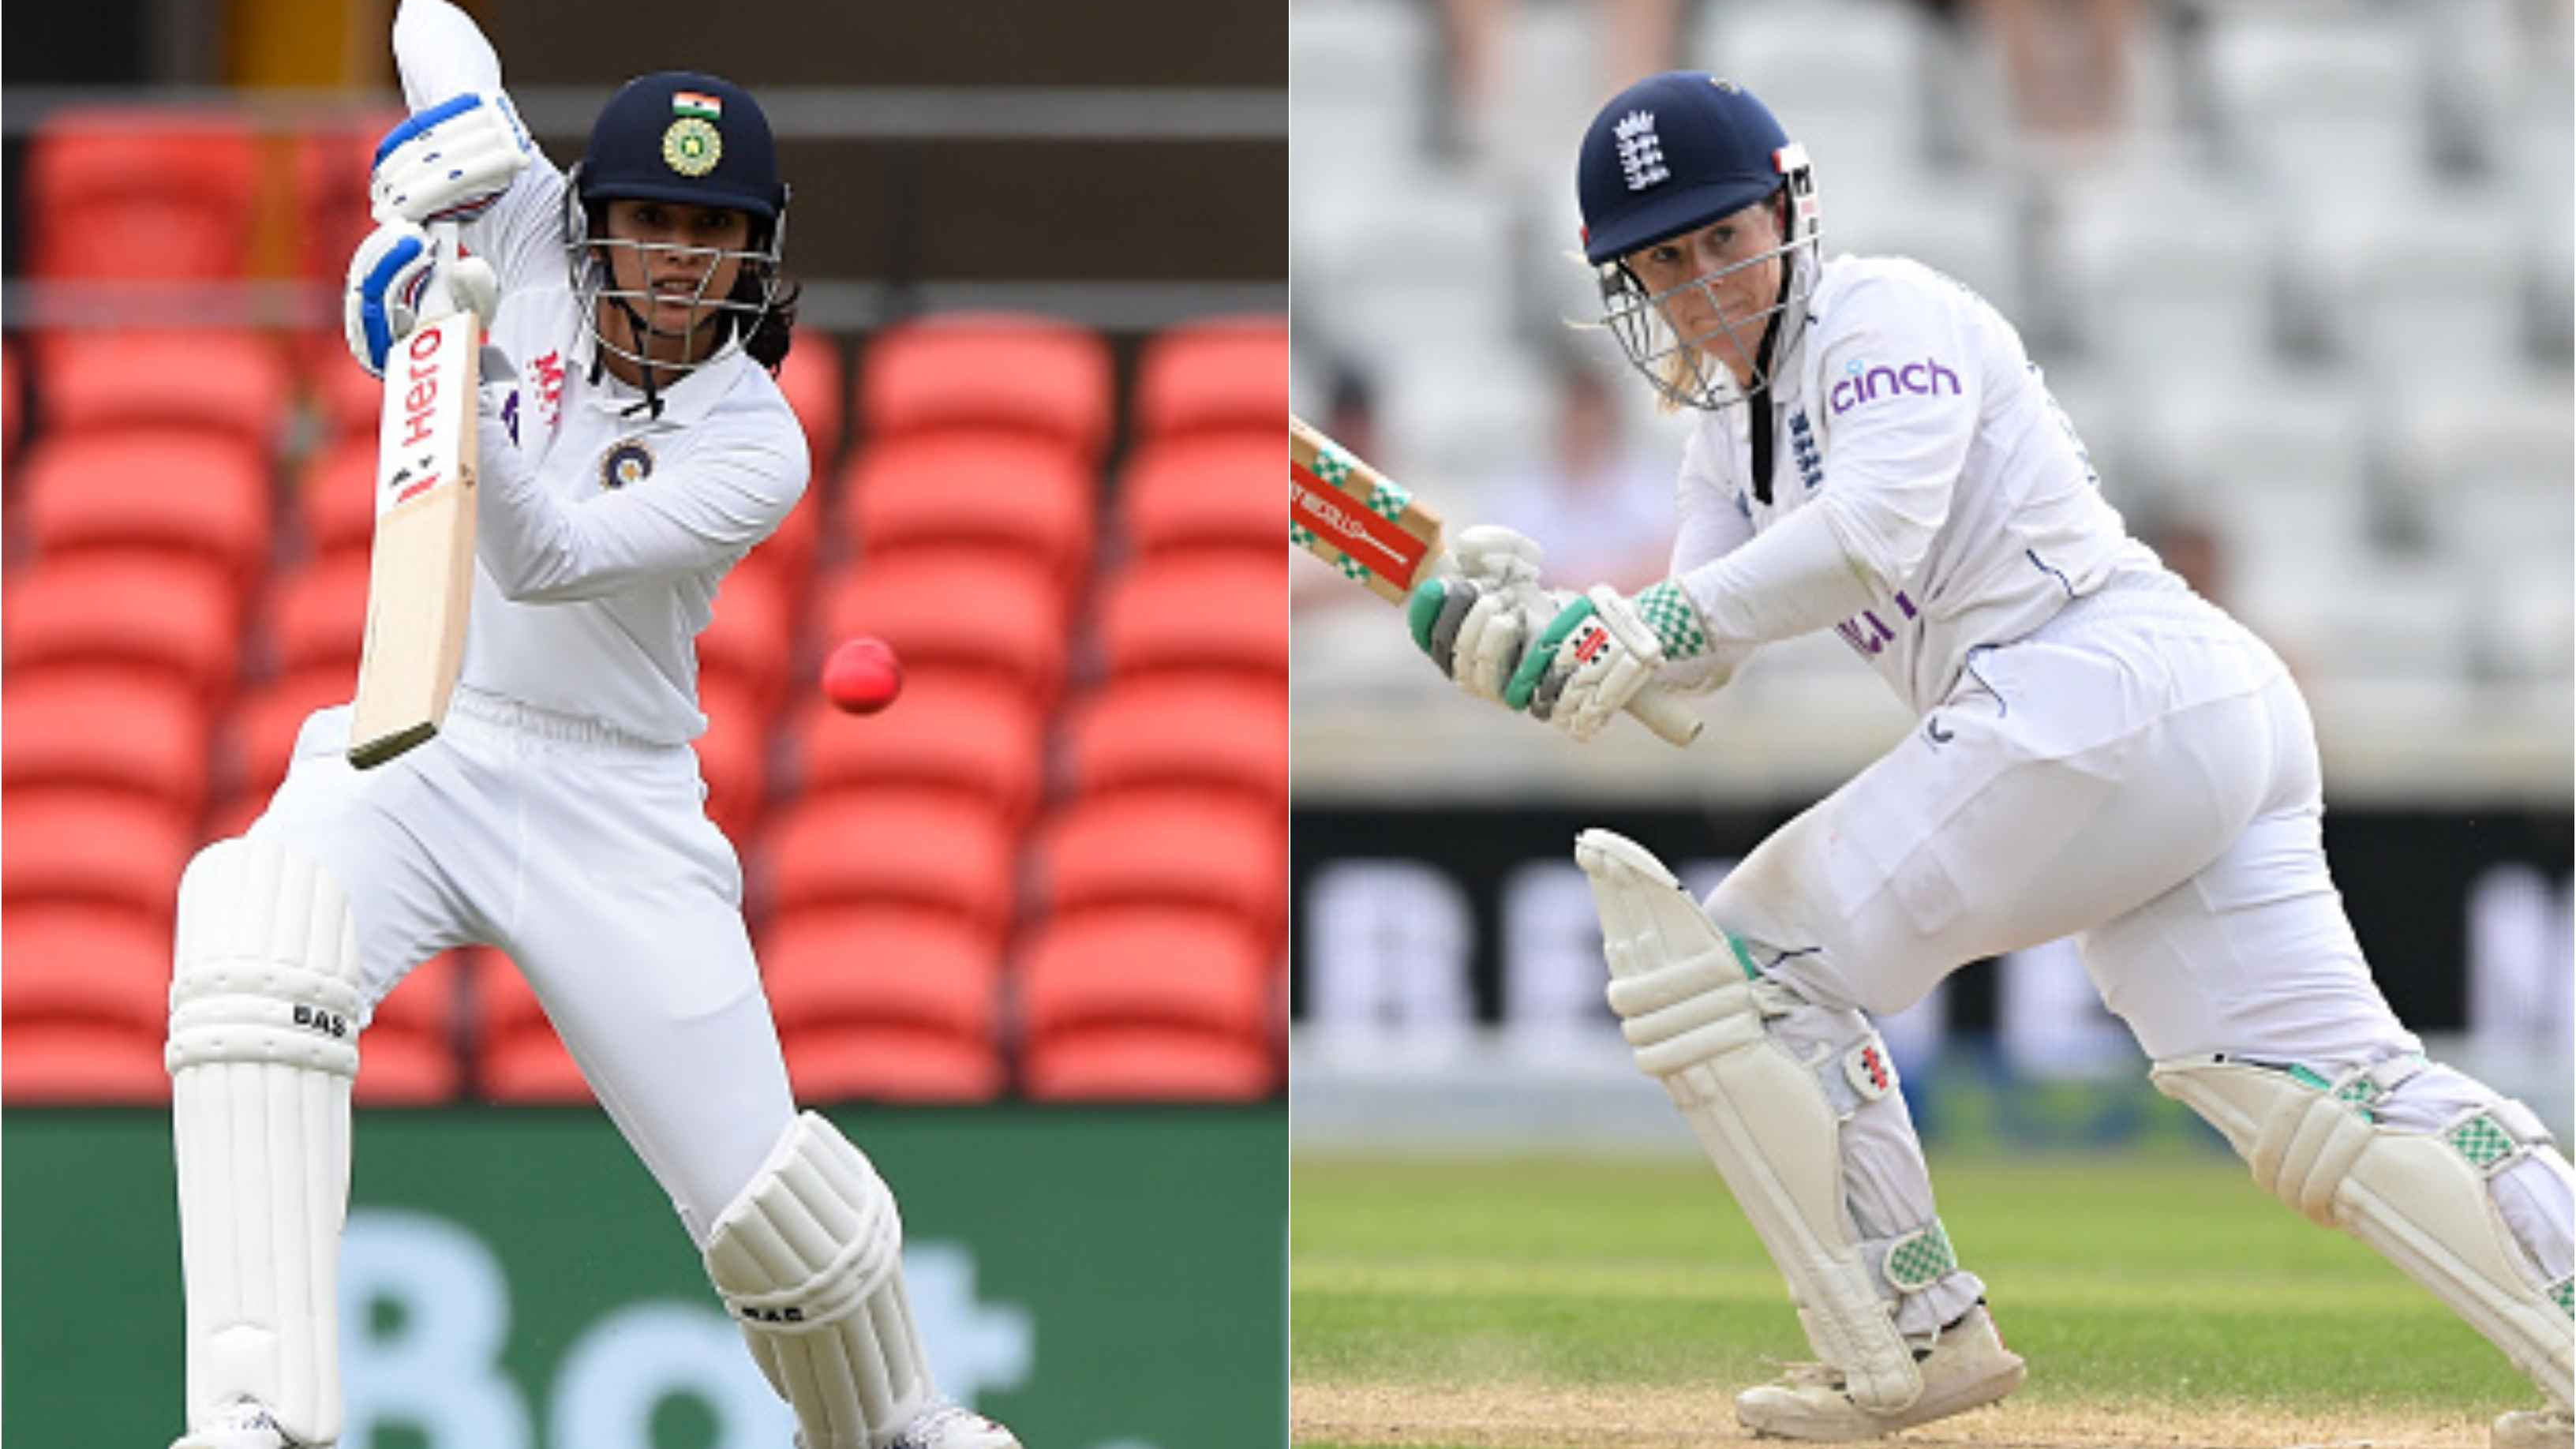 Smriti Mandhana calls for introduction of WTC in women’s cricket; Tammy Beaumont feels it is not the right time